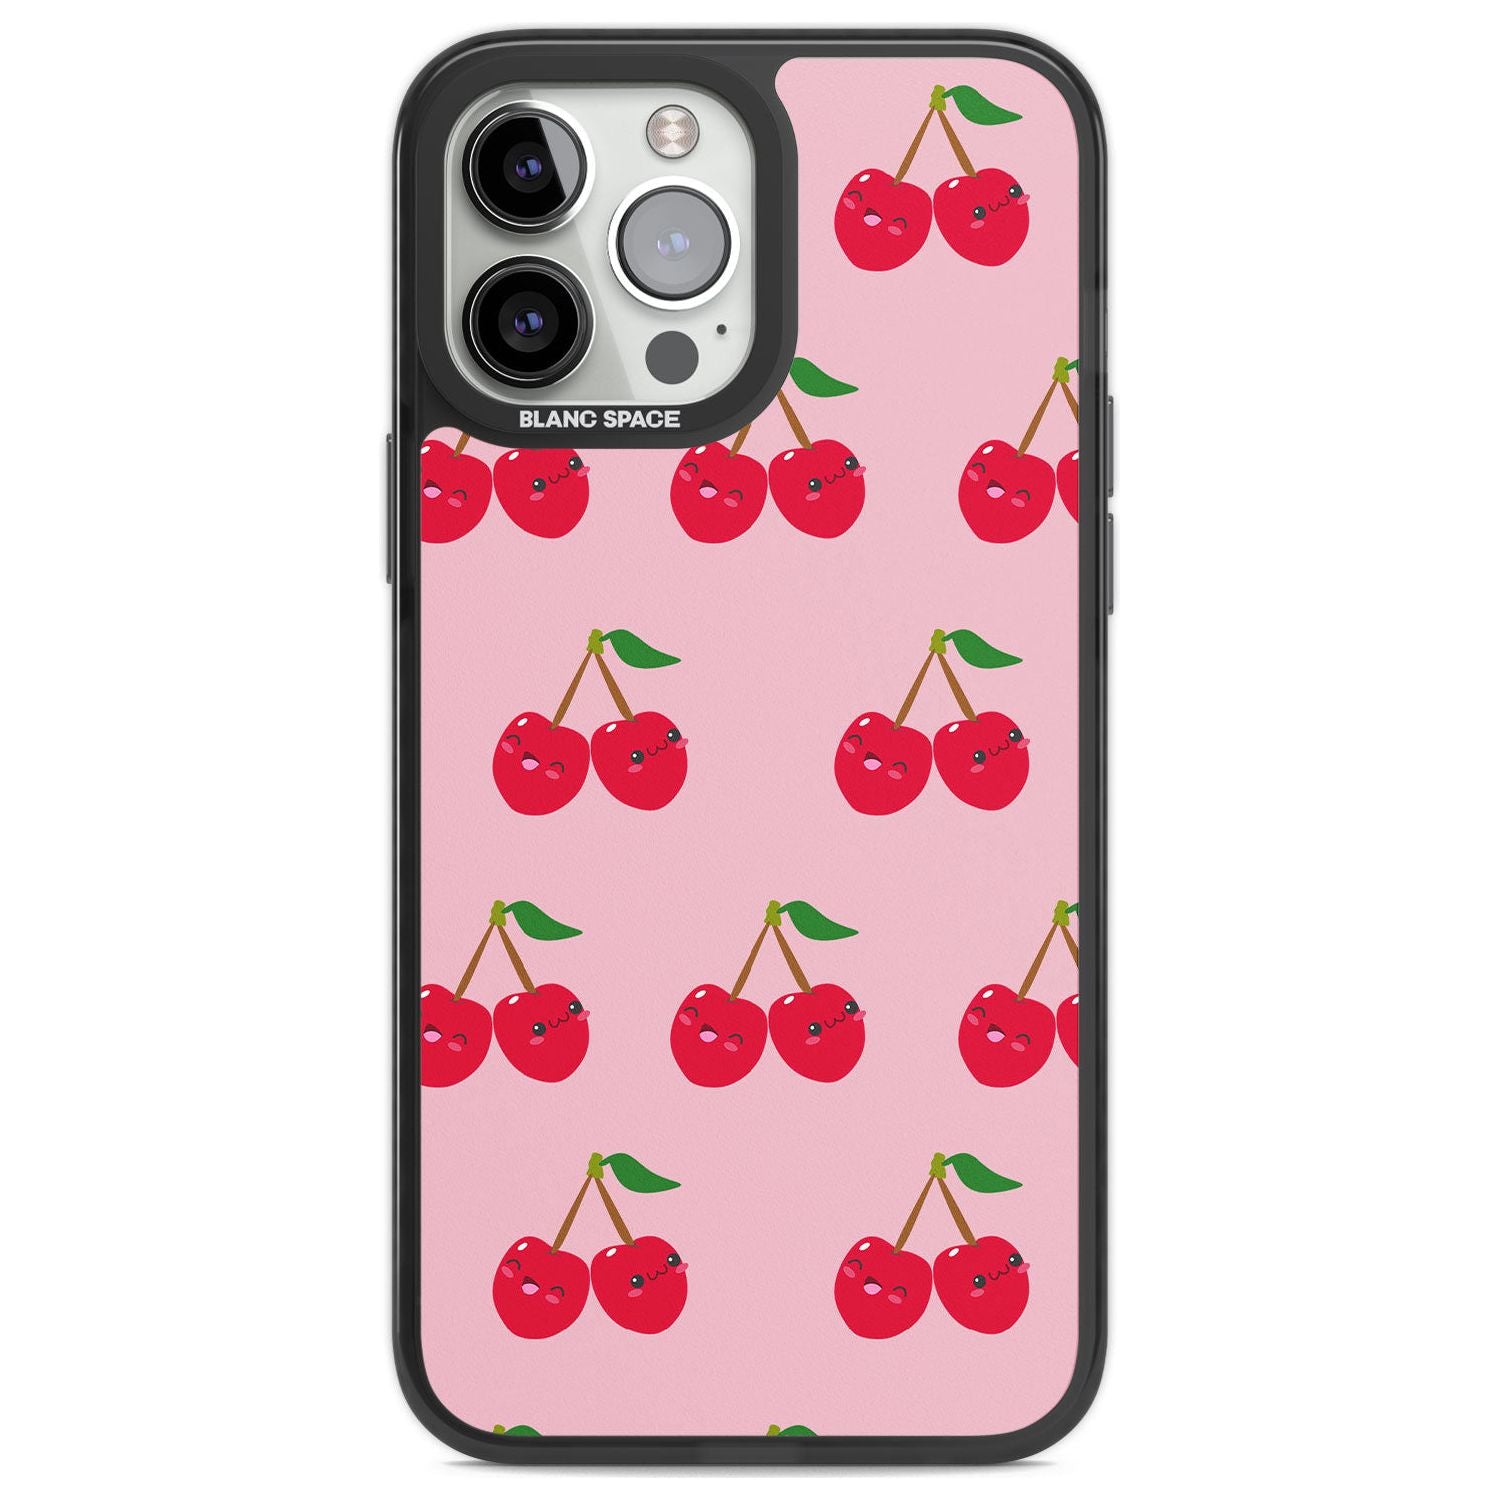 Cheeky Cherry Phone Case iPhone 14 Pro Max / Black Impact Case,iPhone 13 Pro Max / Black Impact Case Blanc Space